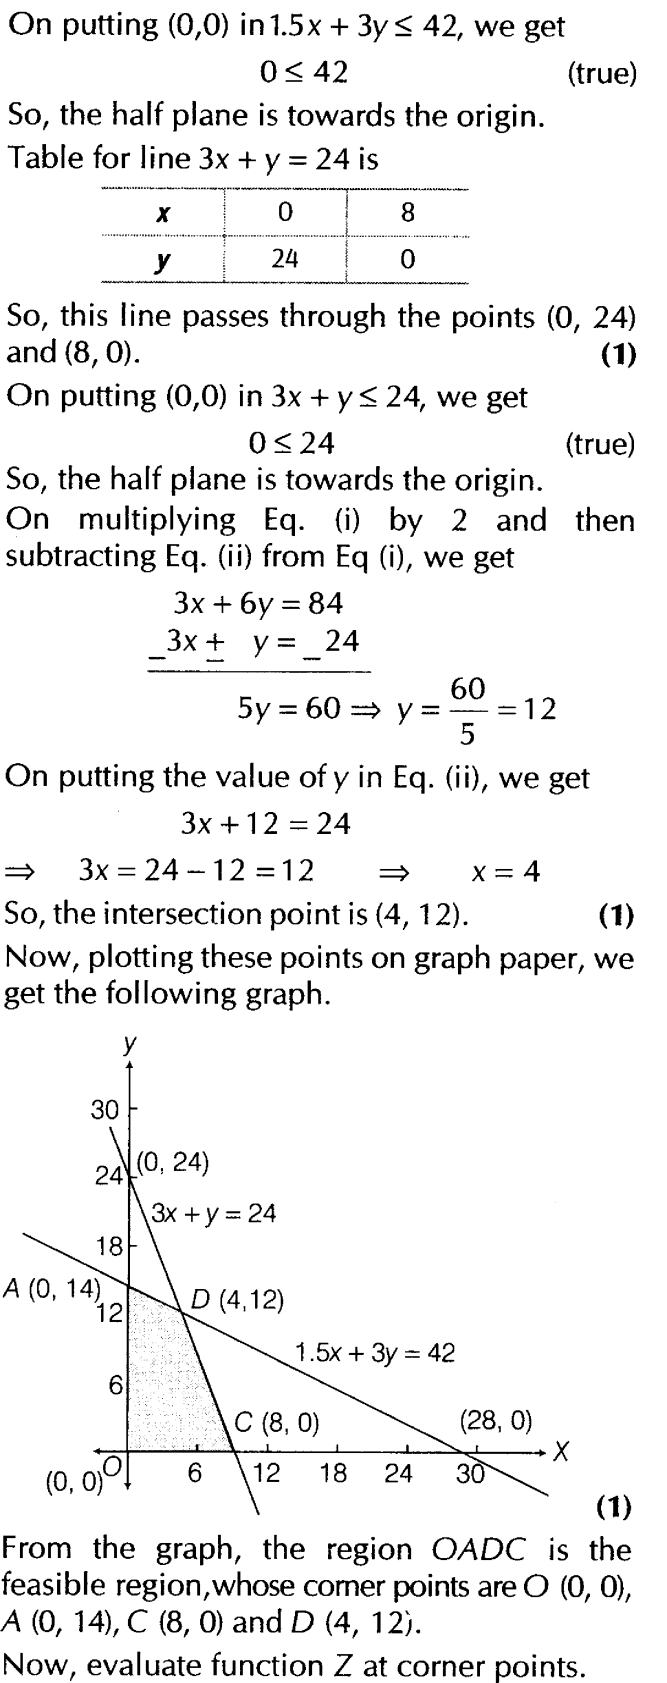 important-questions-for-class-12-maths-cbse-linear-programming-t1-q-11ssjpg_Page1